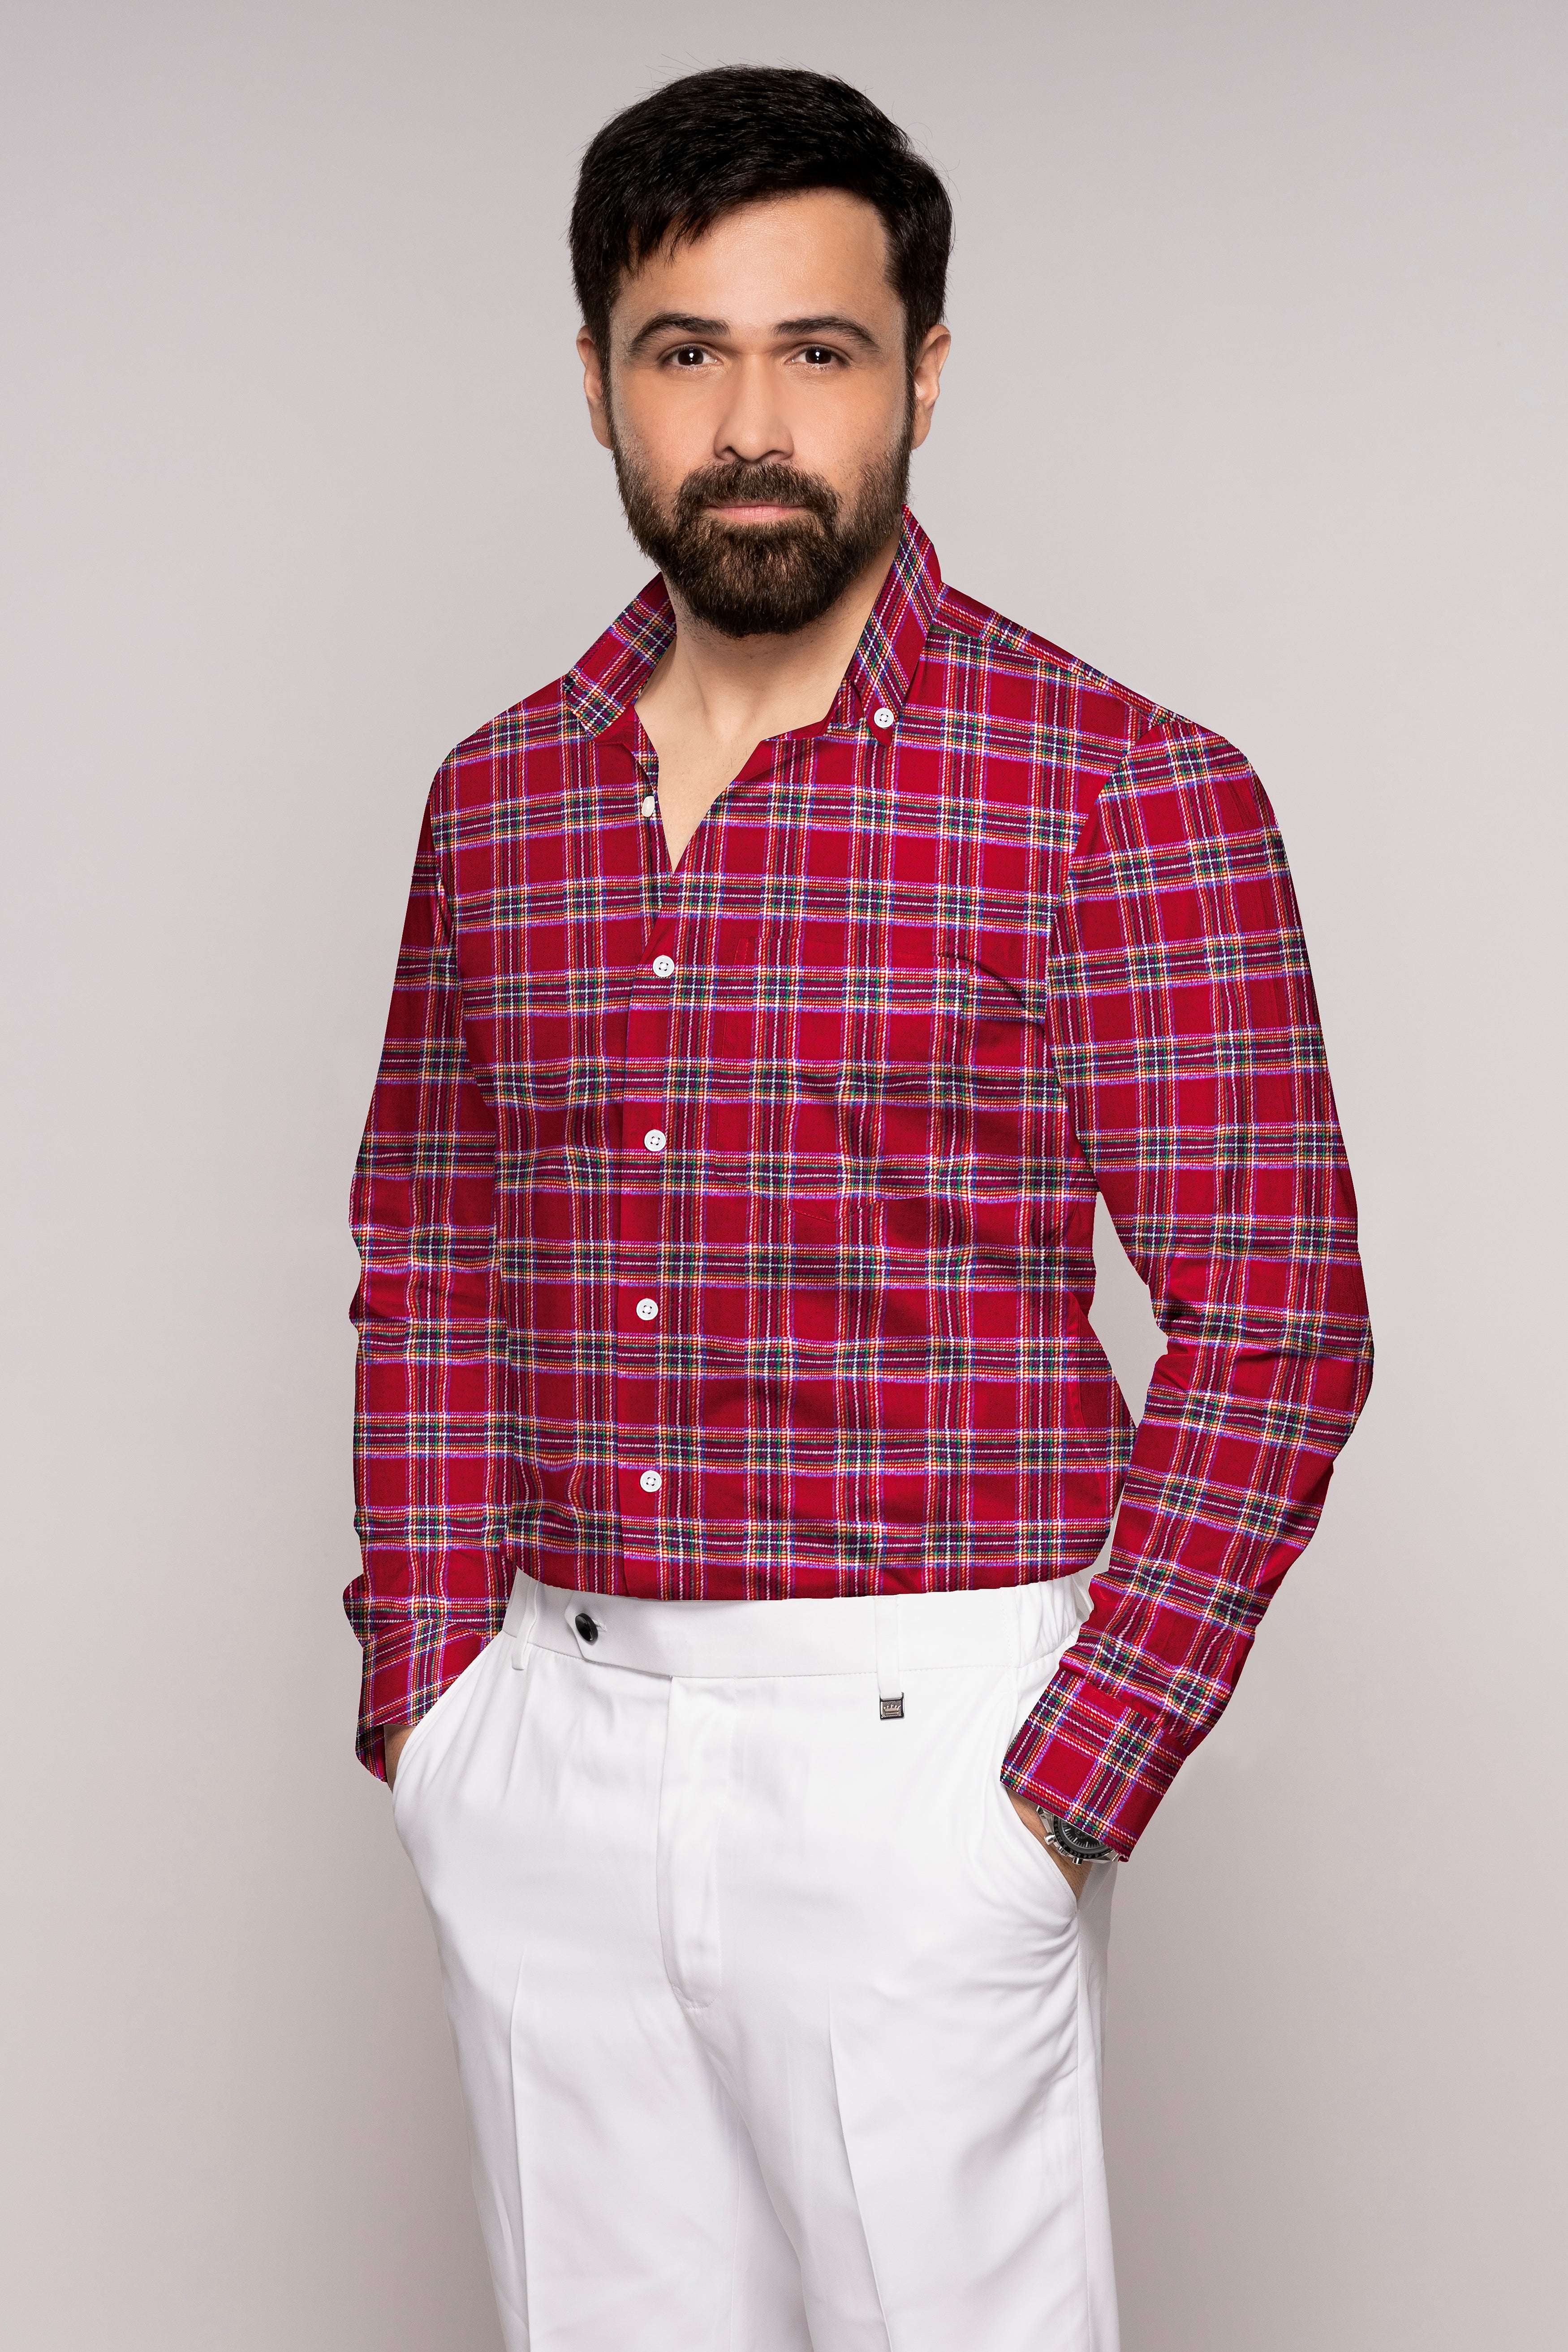 Shiraz Red with Mariner Blue Plaid Flannel Button Down Shirt